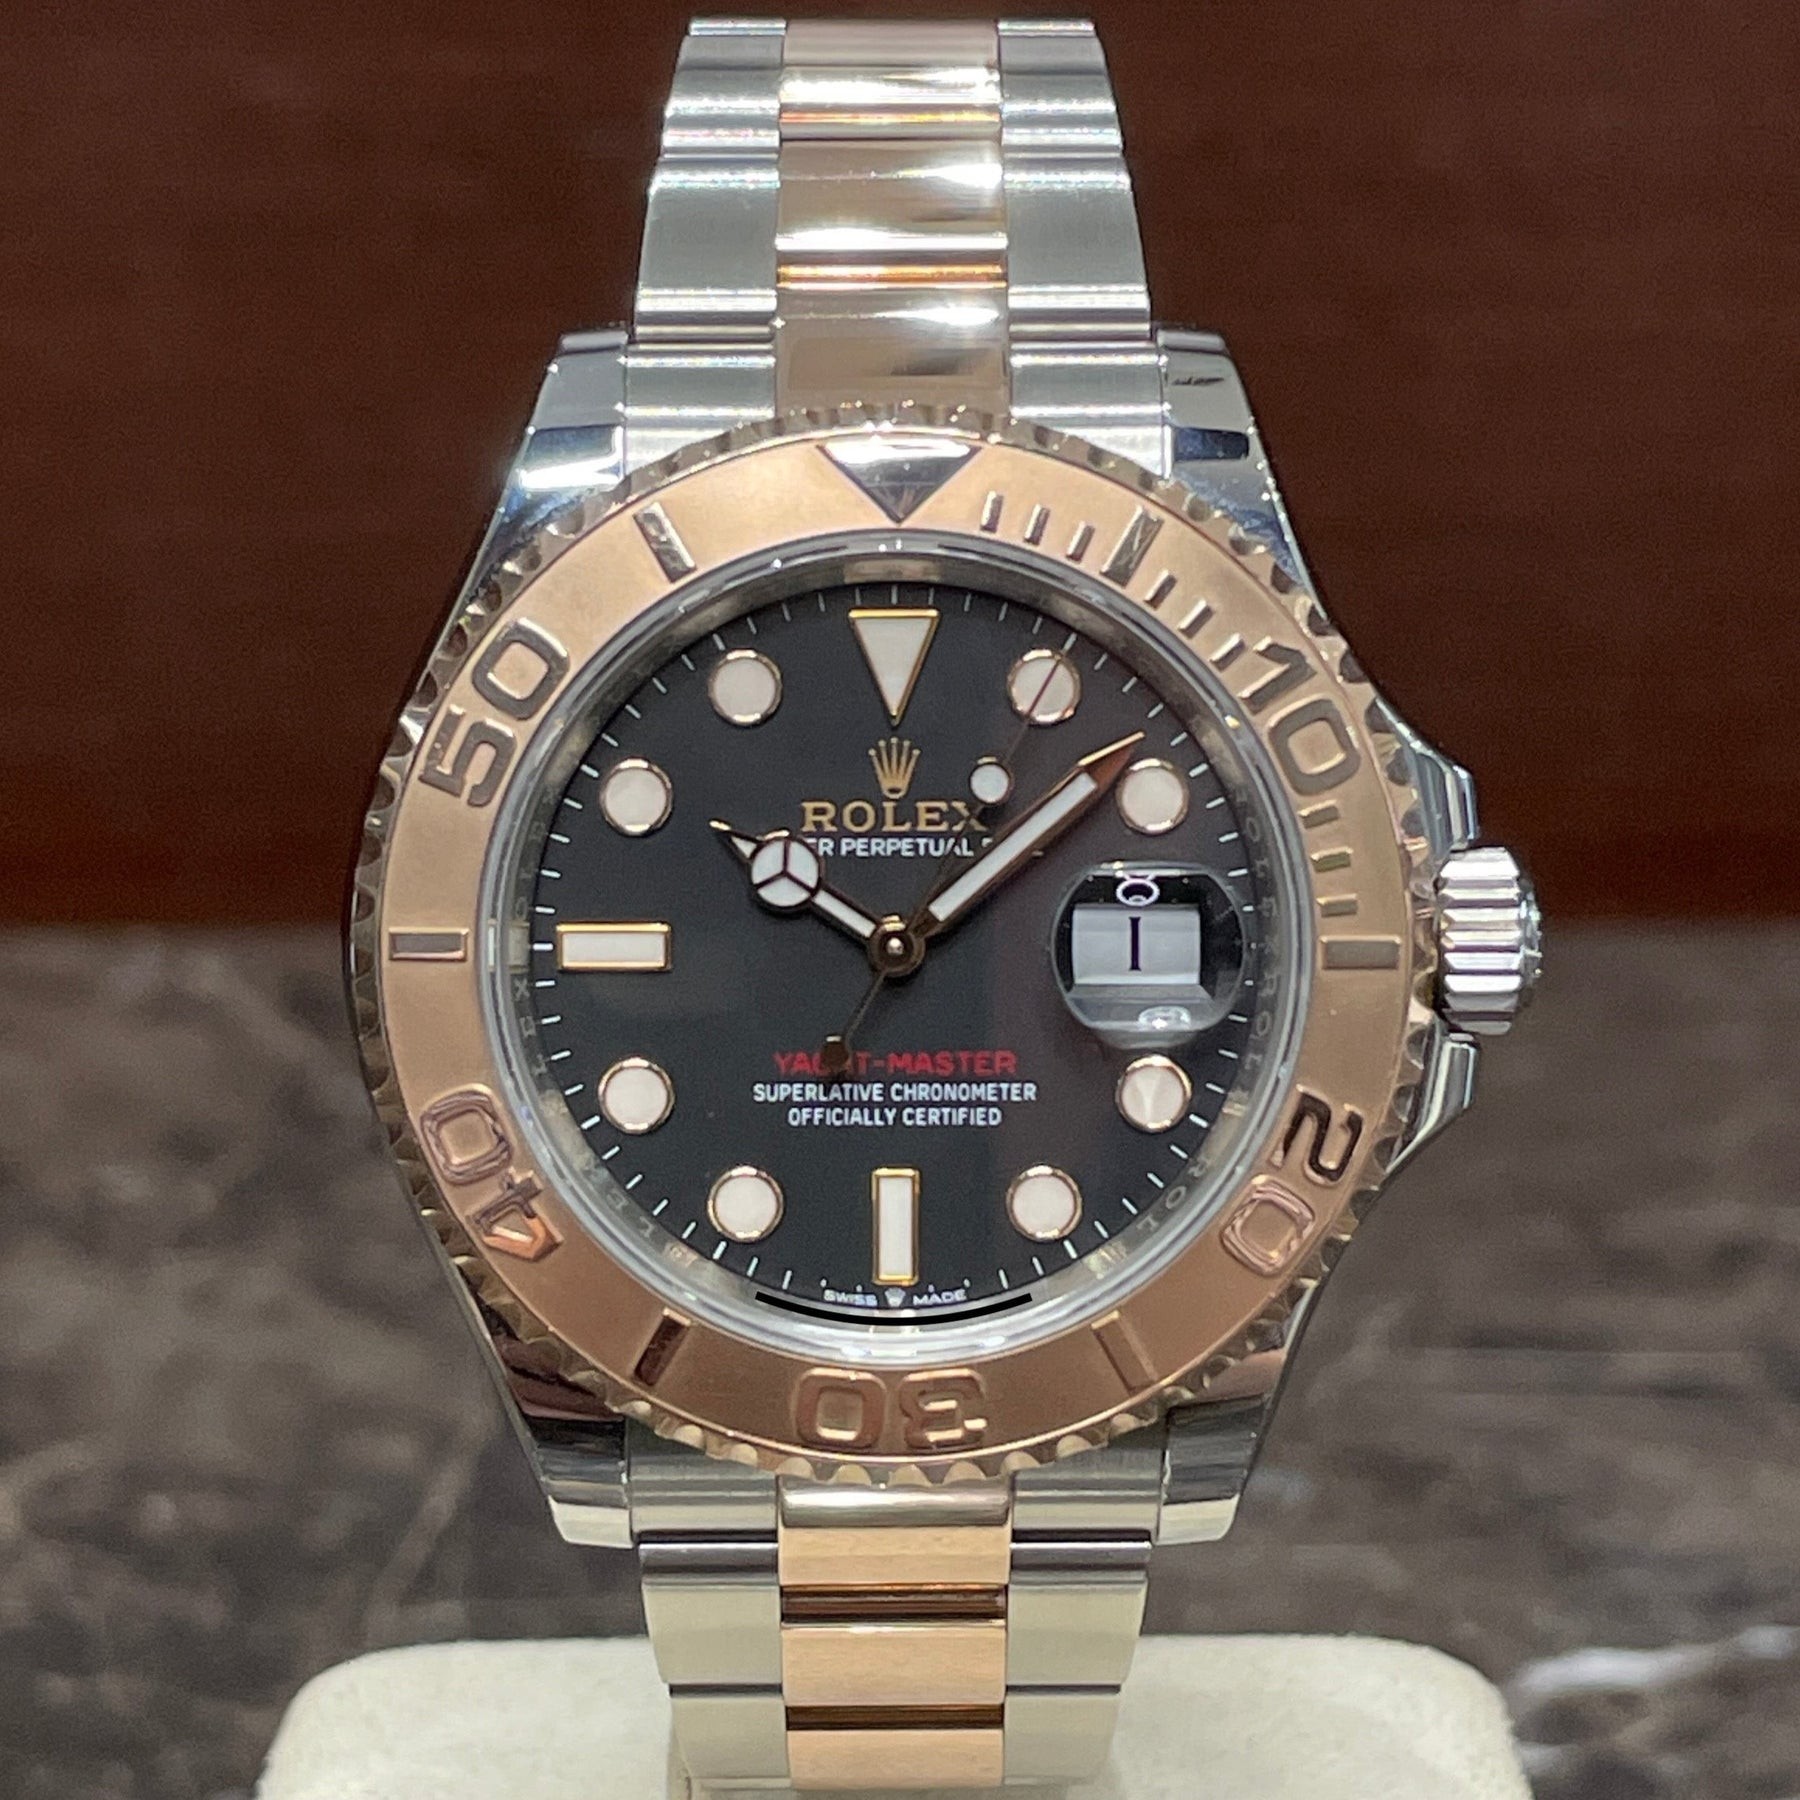 Rolex Yacht-Master 116621 Two-Tone Watch Review - Bob's Watches